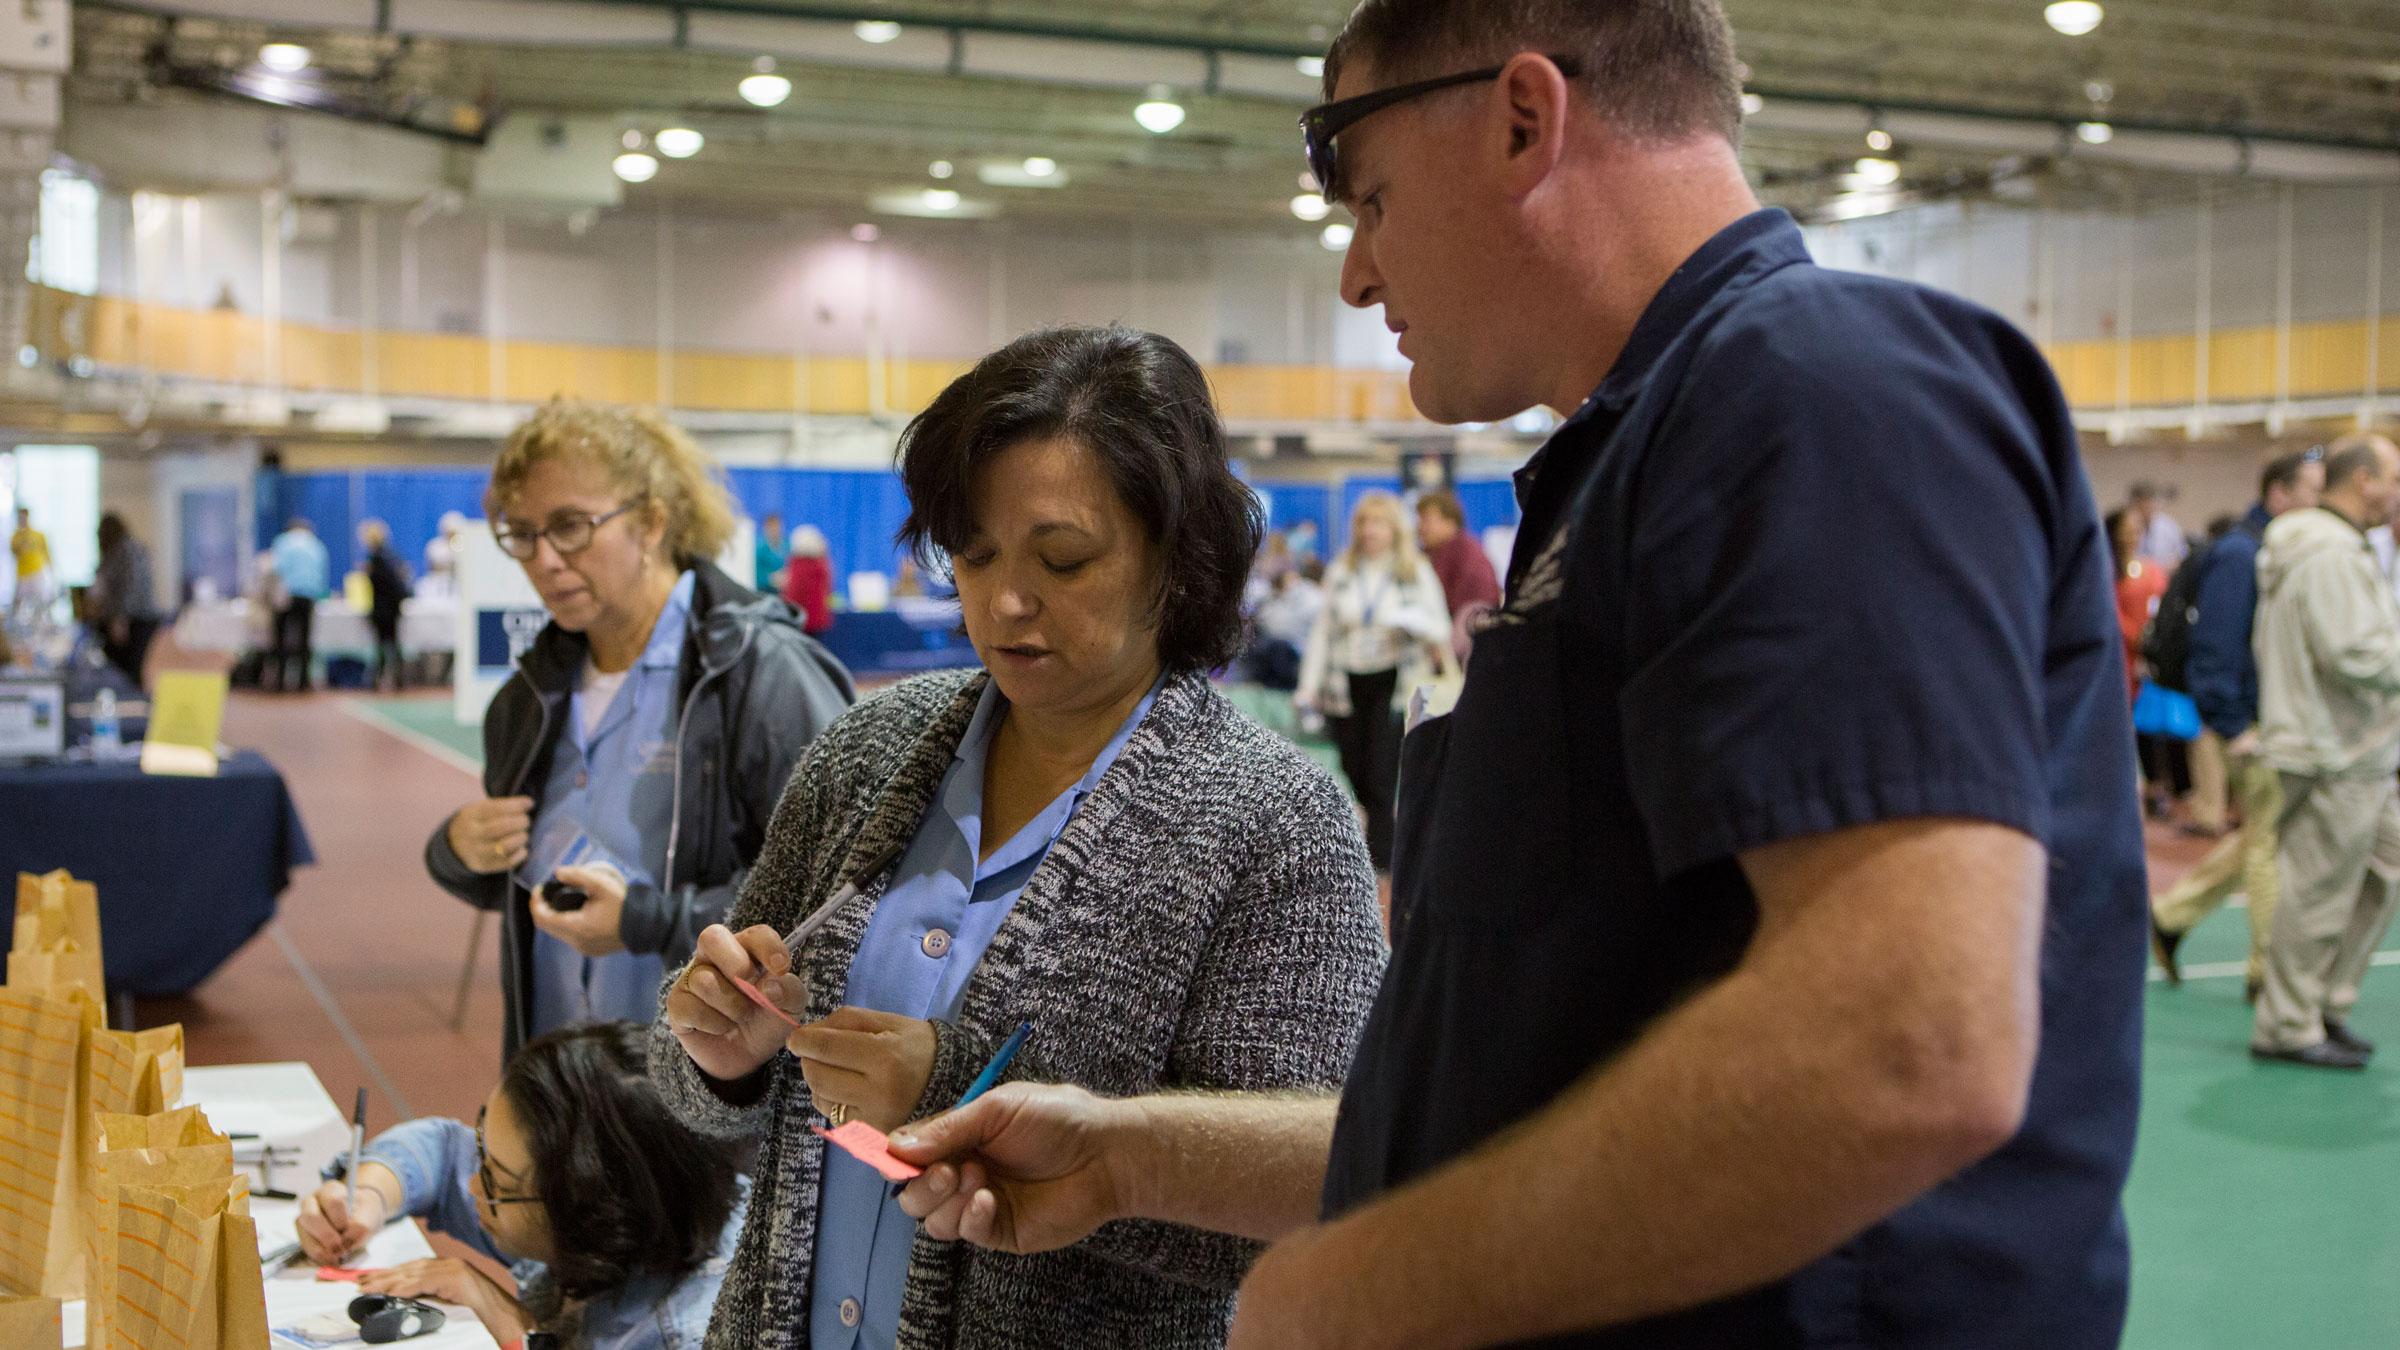 Employees place raffle tickets in to bags during benefits fair